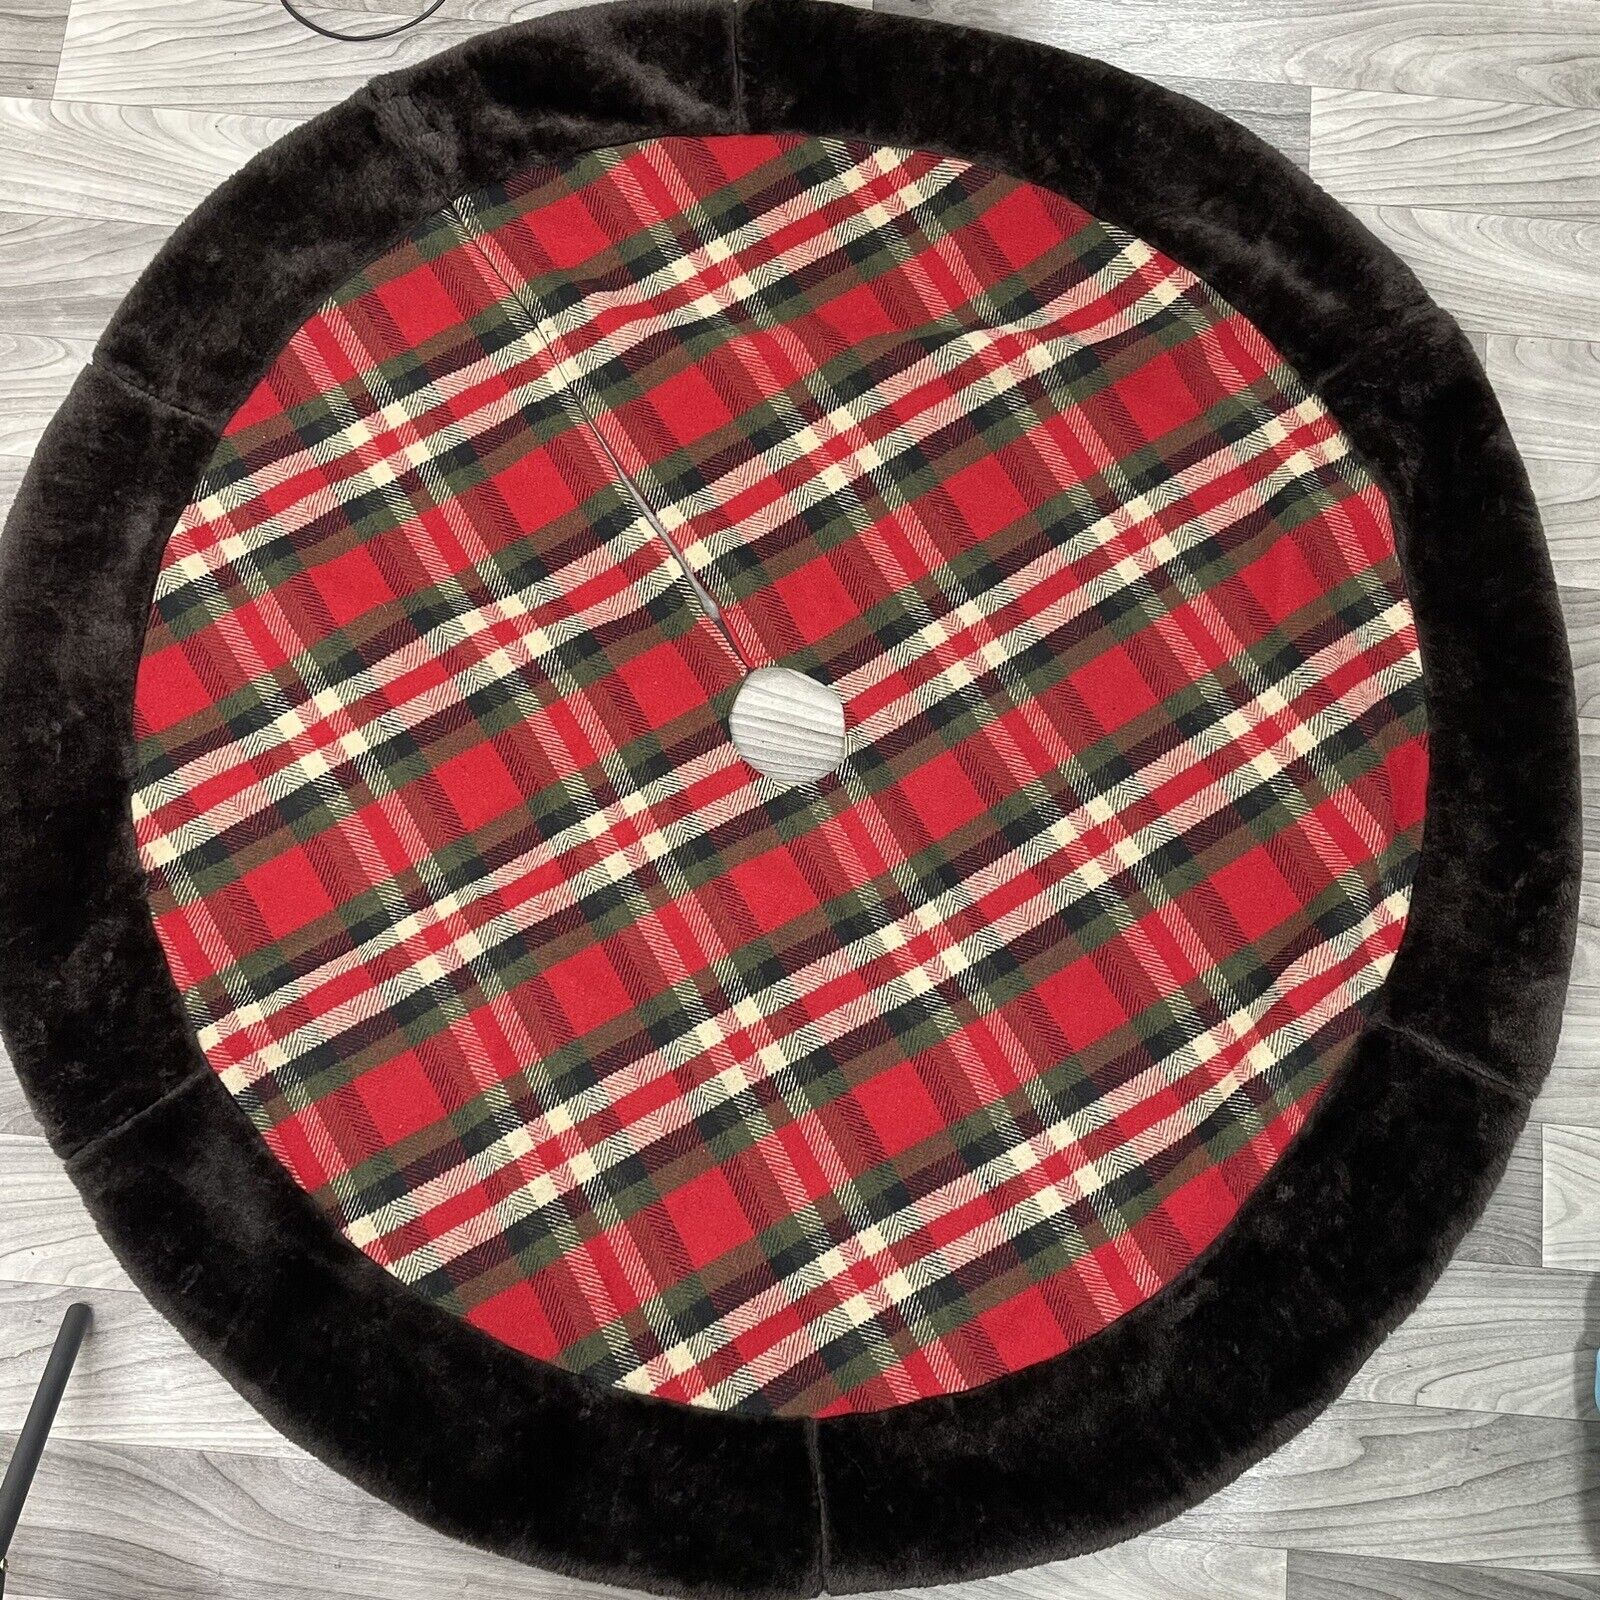 Unbranded  Wool Blend RED PLAID TARTAN CHRISTMAS🎄TREE SKIRT with Faux Fur Trim